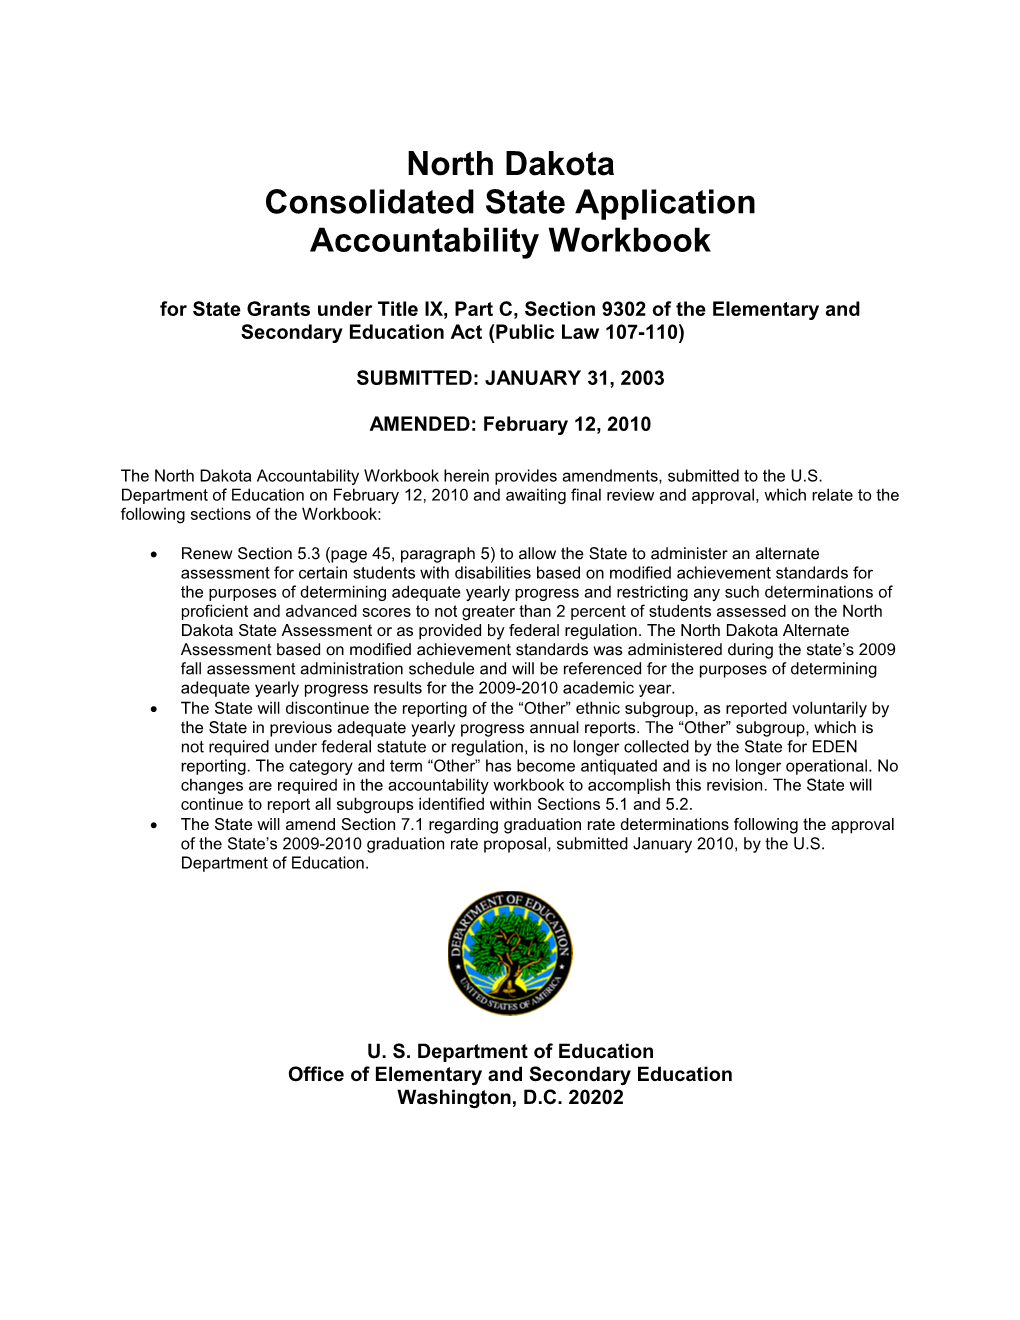 Consolidated State Application Accountability Workbook (MSWORD)